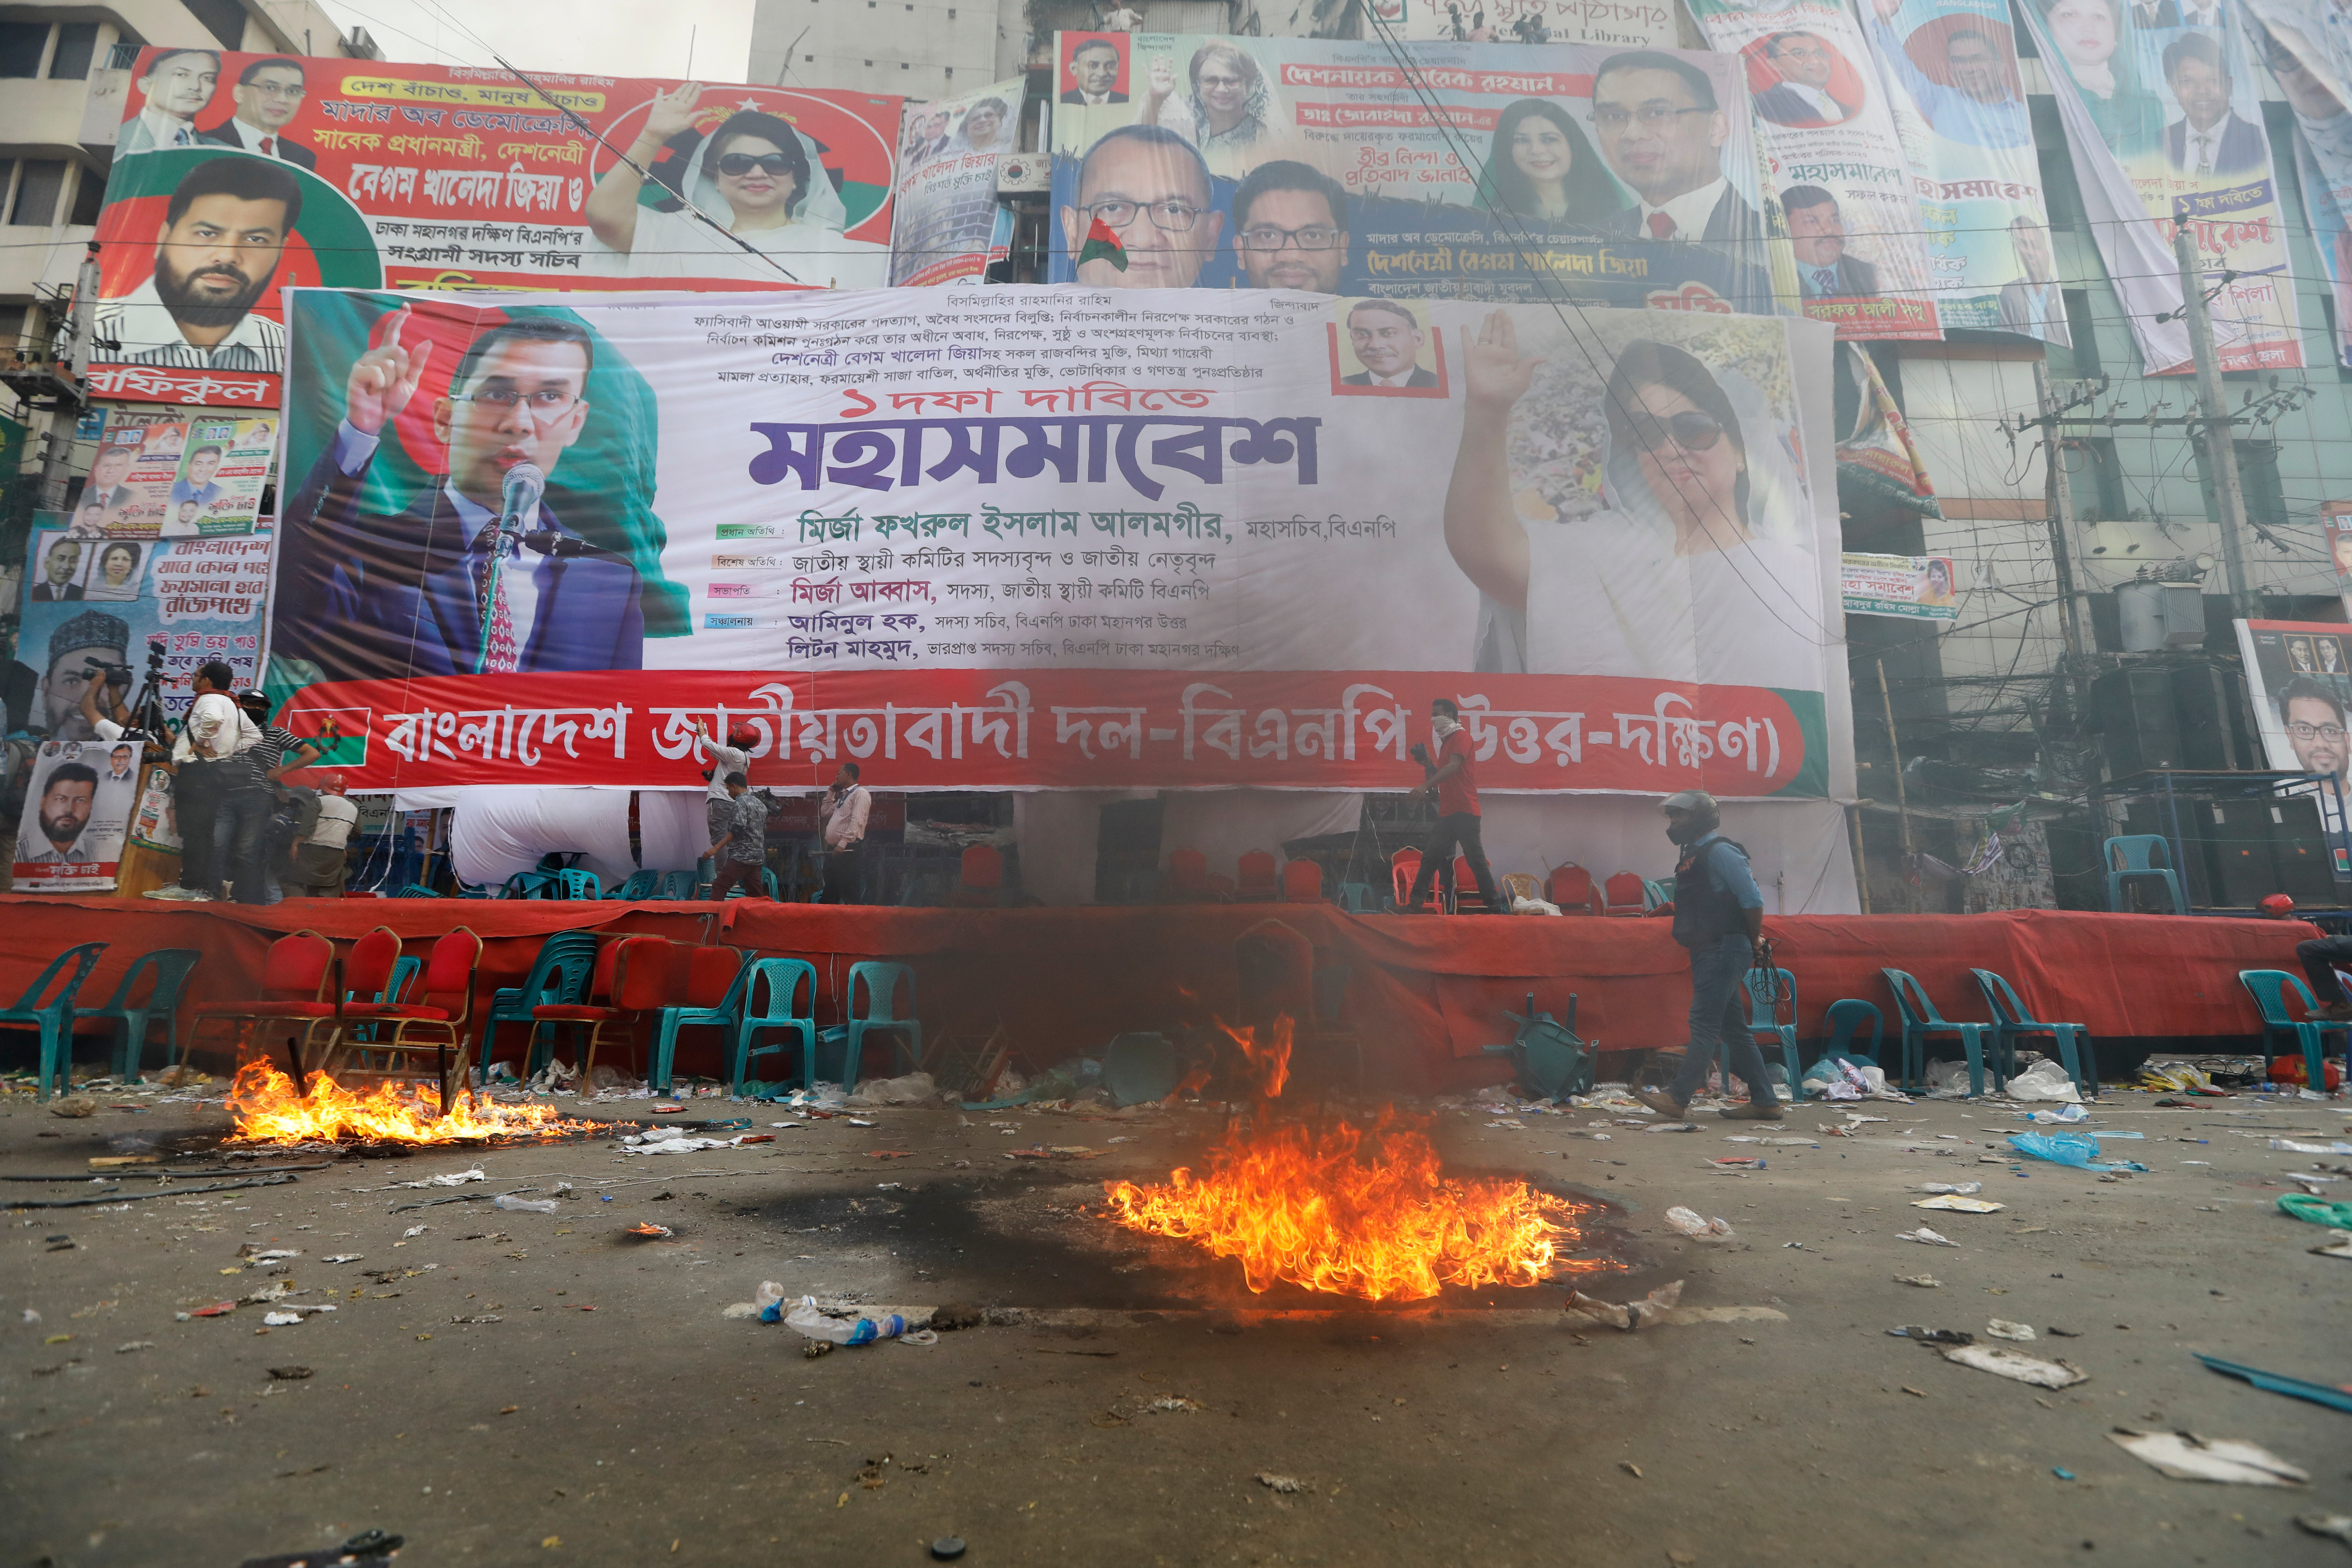 Smoke rises from flames near the stage set for a protest by the Bangladesh Nationalist Party in Dhaka, Bangladesh on 28 October